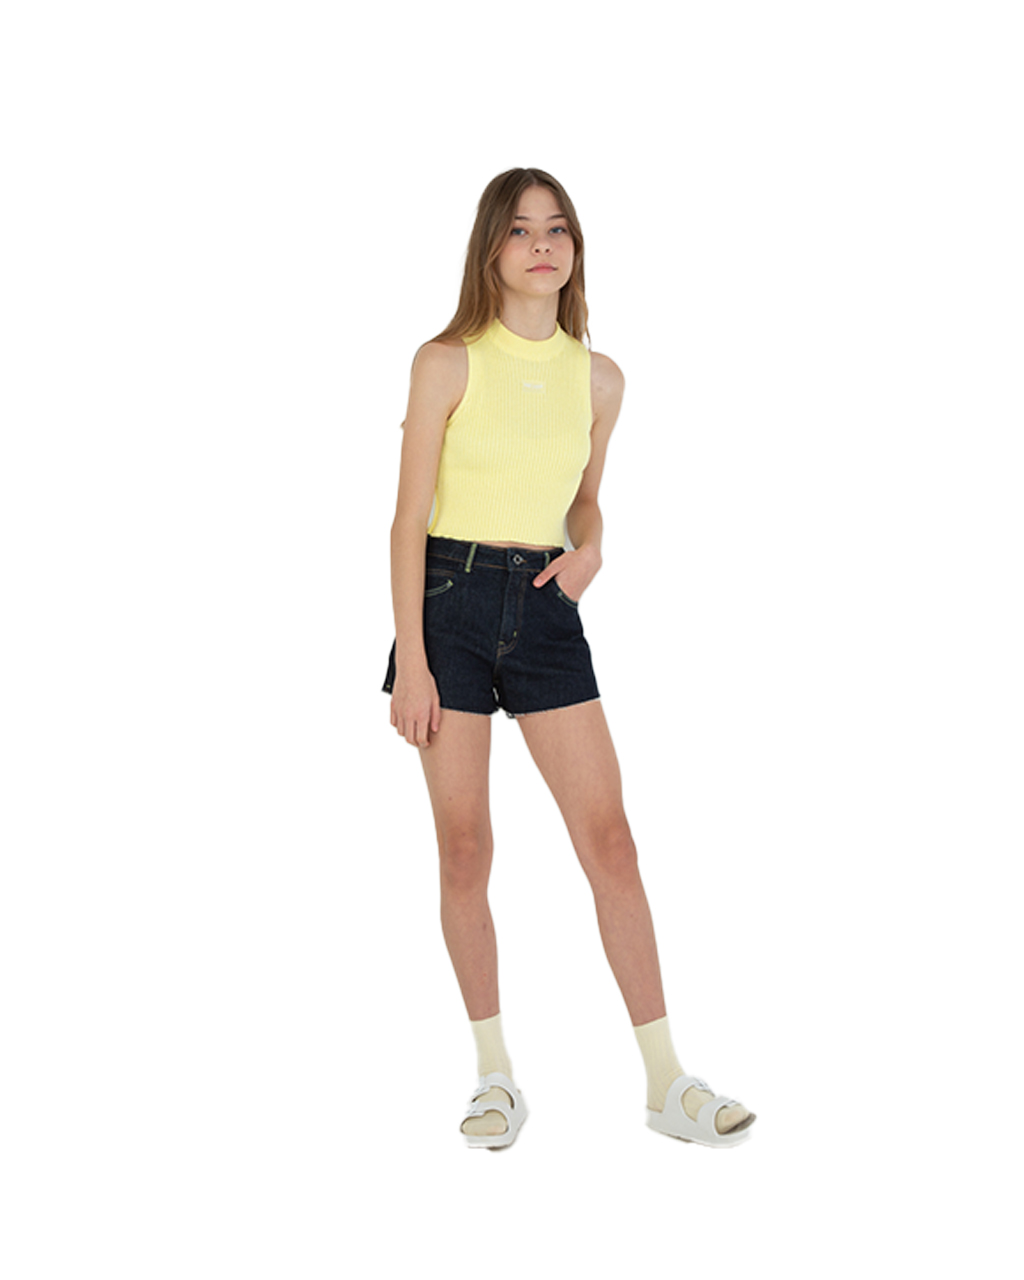 Blusa Teen Trico Amarelo Dimy Candy